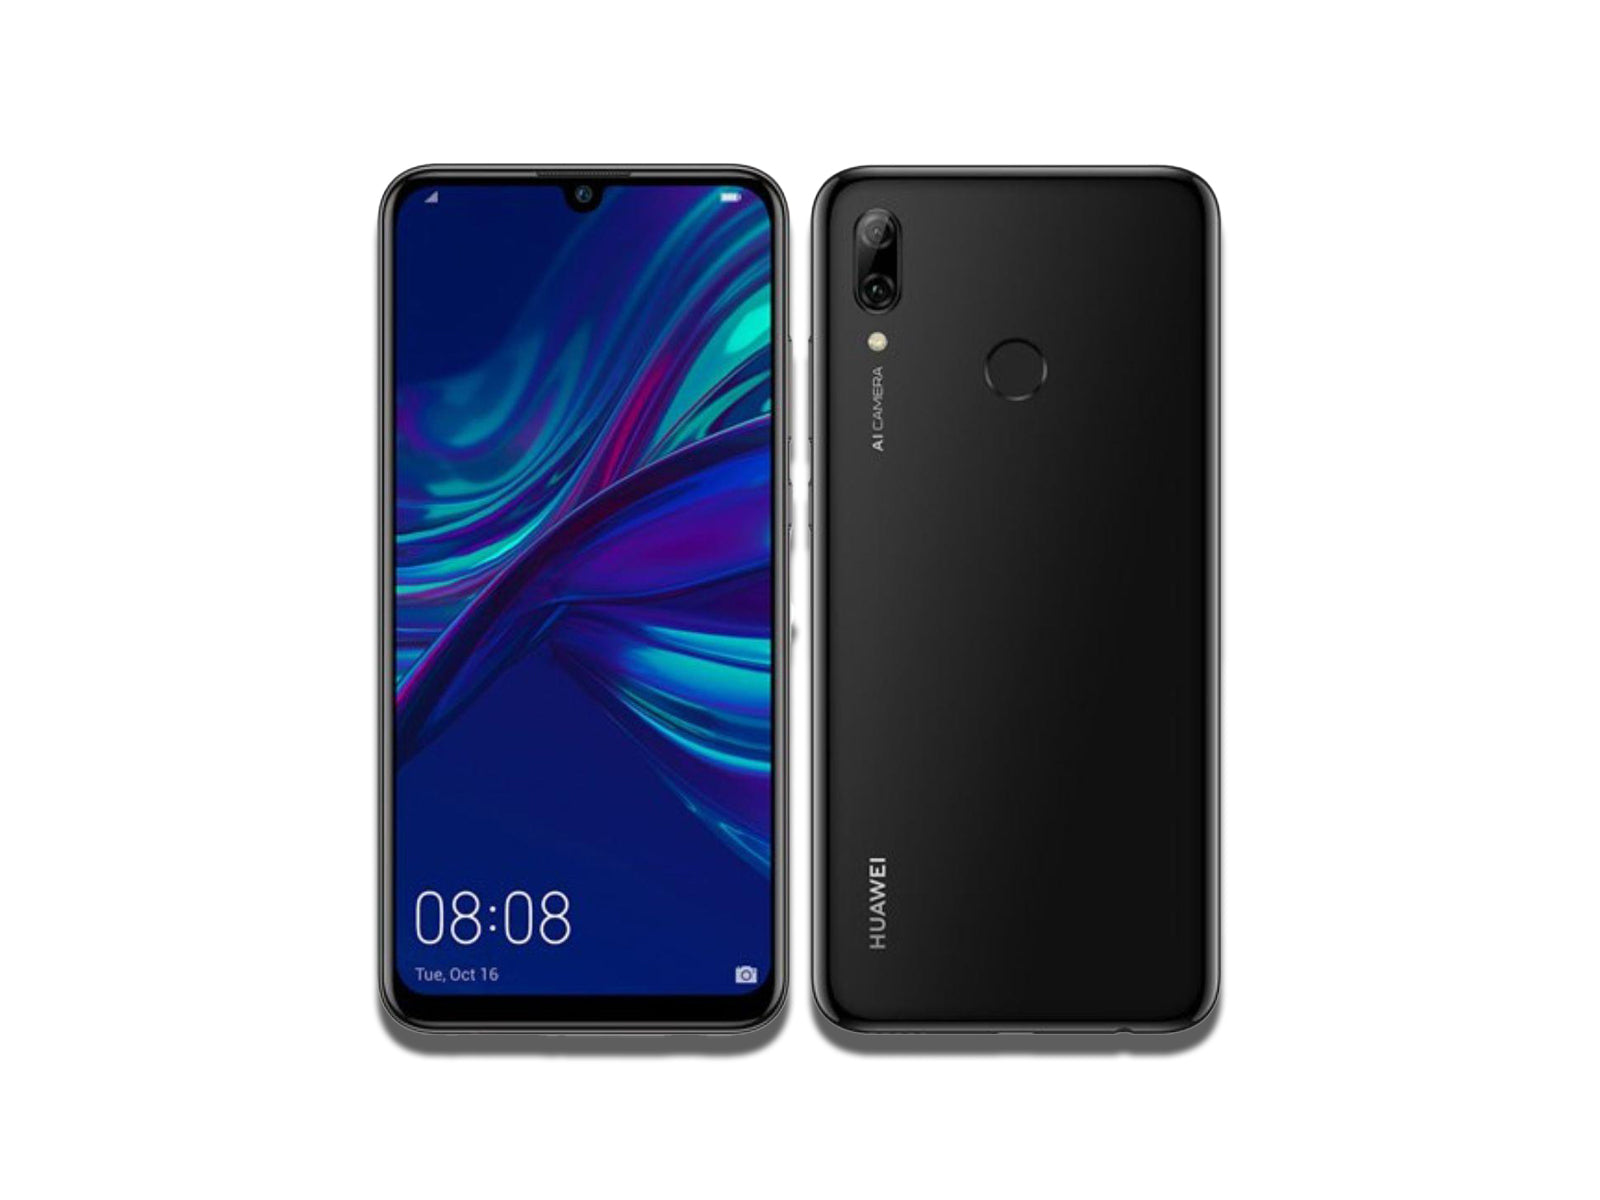 Image Showing Black Colour Variant of The Huawei Nova 3 on The White Background